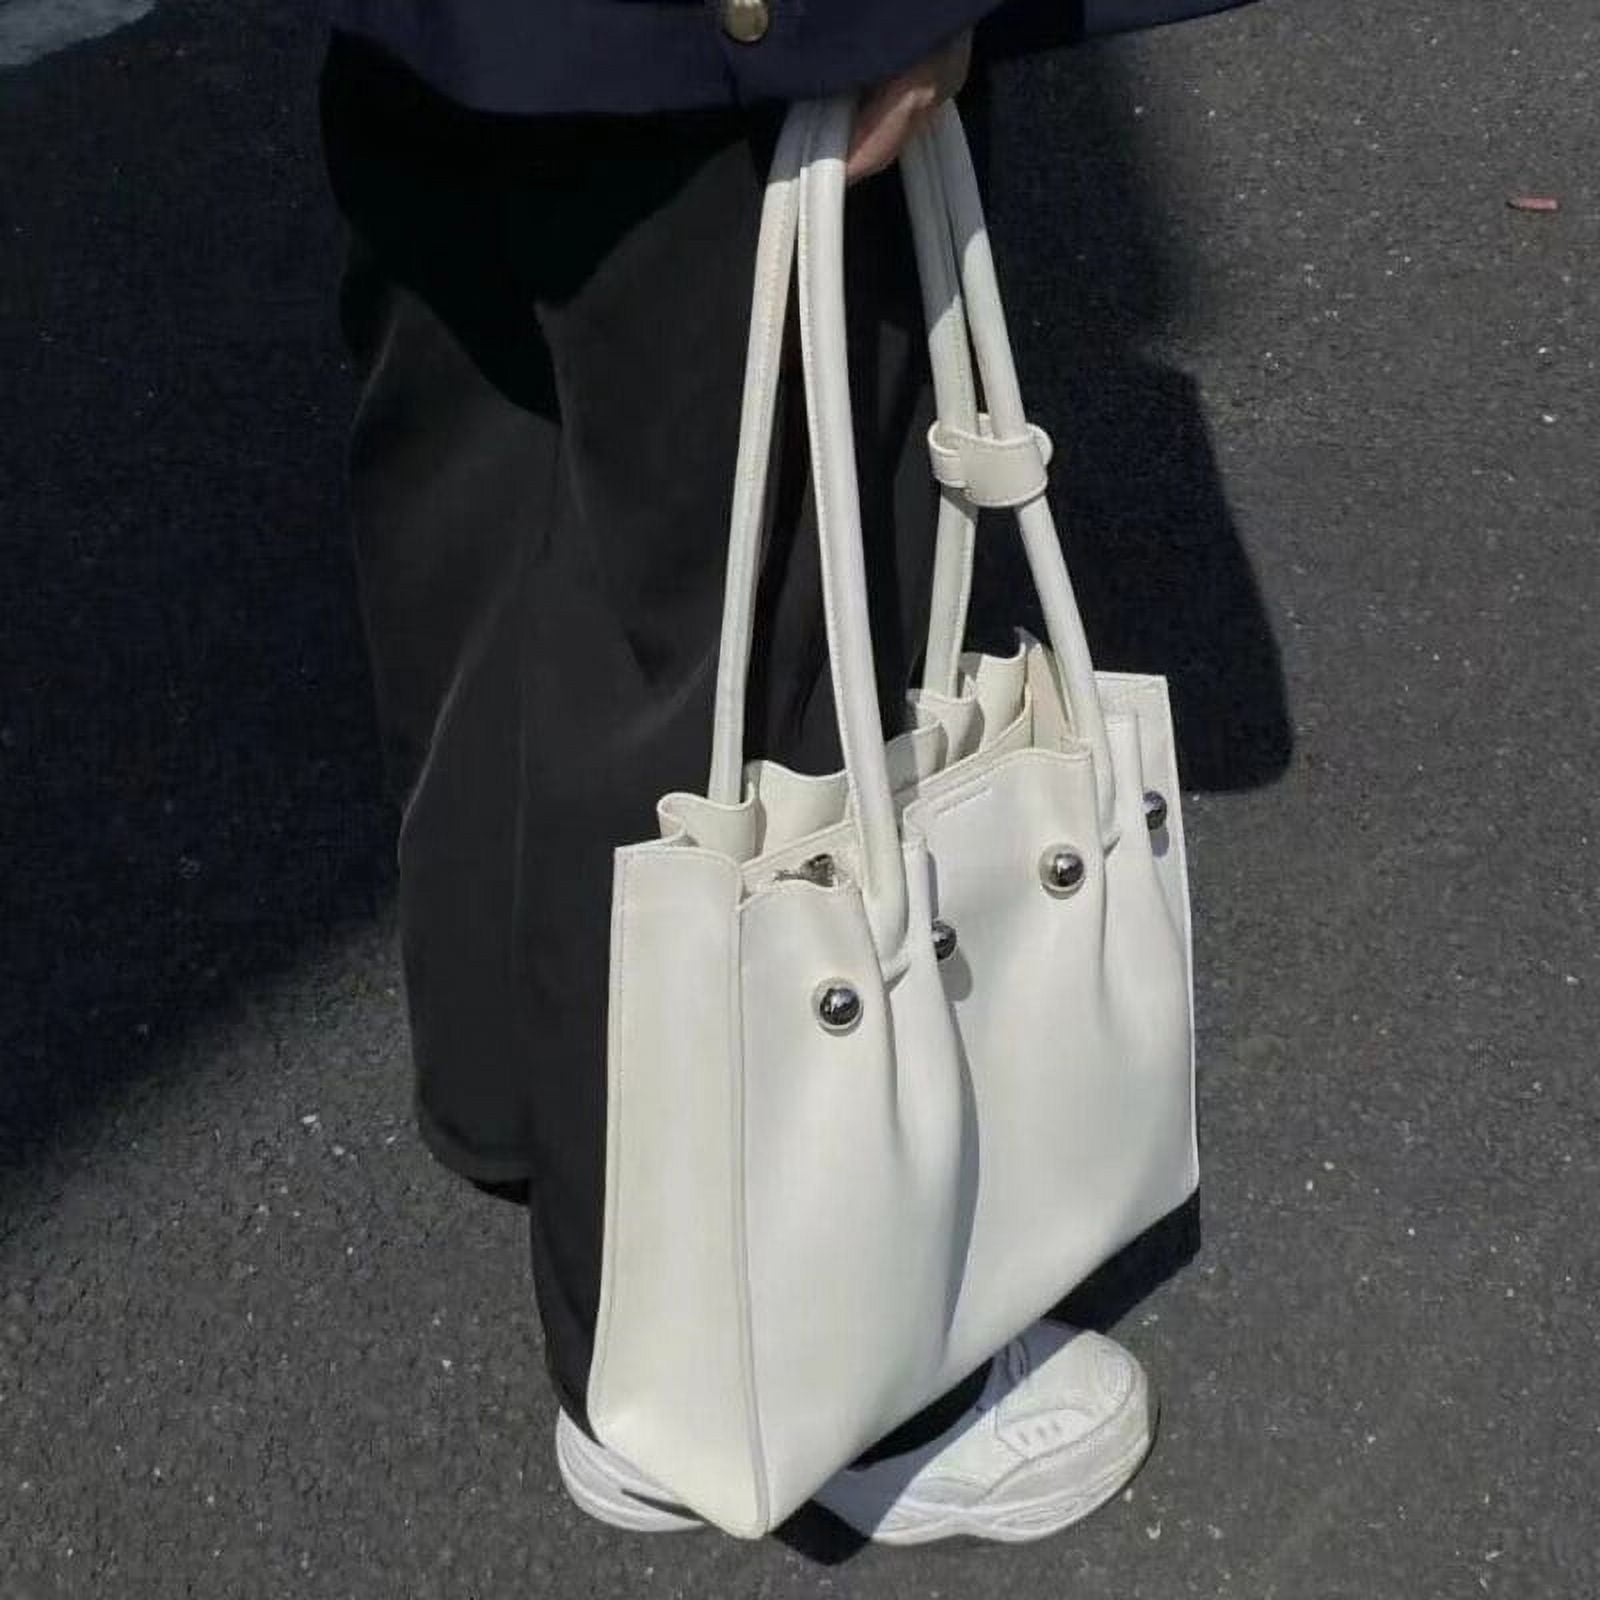 LLG Quote: Best. Mom. Ever. Black and Oyster White Small Eco Tote